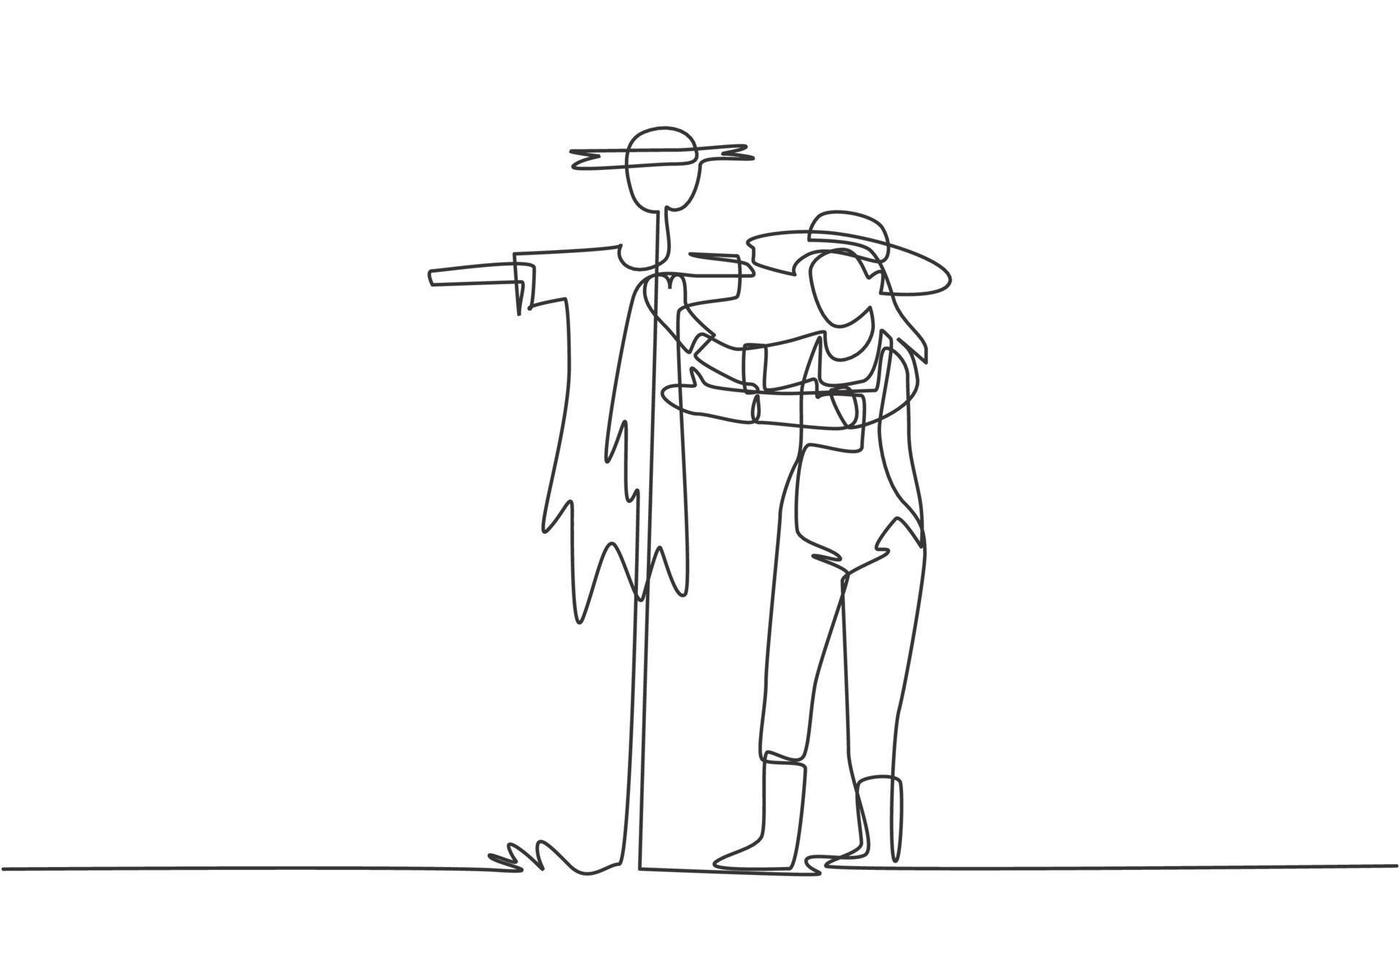 Single continuous line drawing a young female farmer in a straw hat putting up scarecrow to keep out pests of birds. Farming minimalist concept. One line draw graphic design vector illustration.